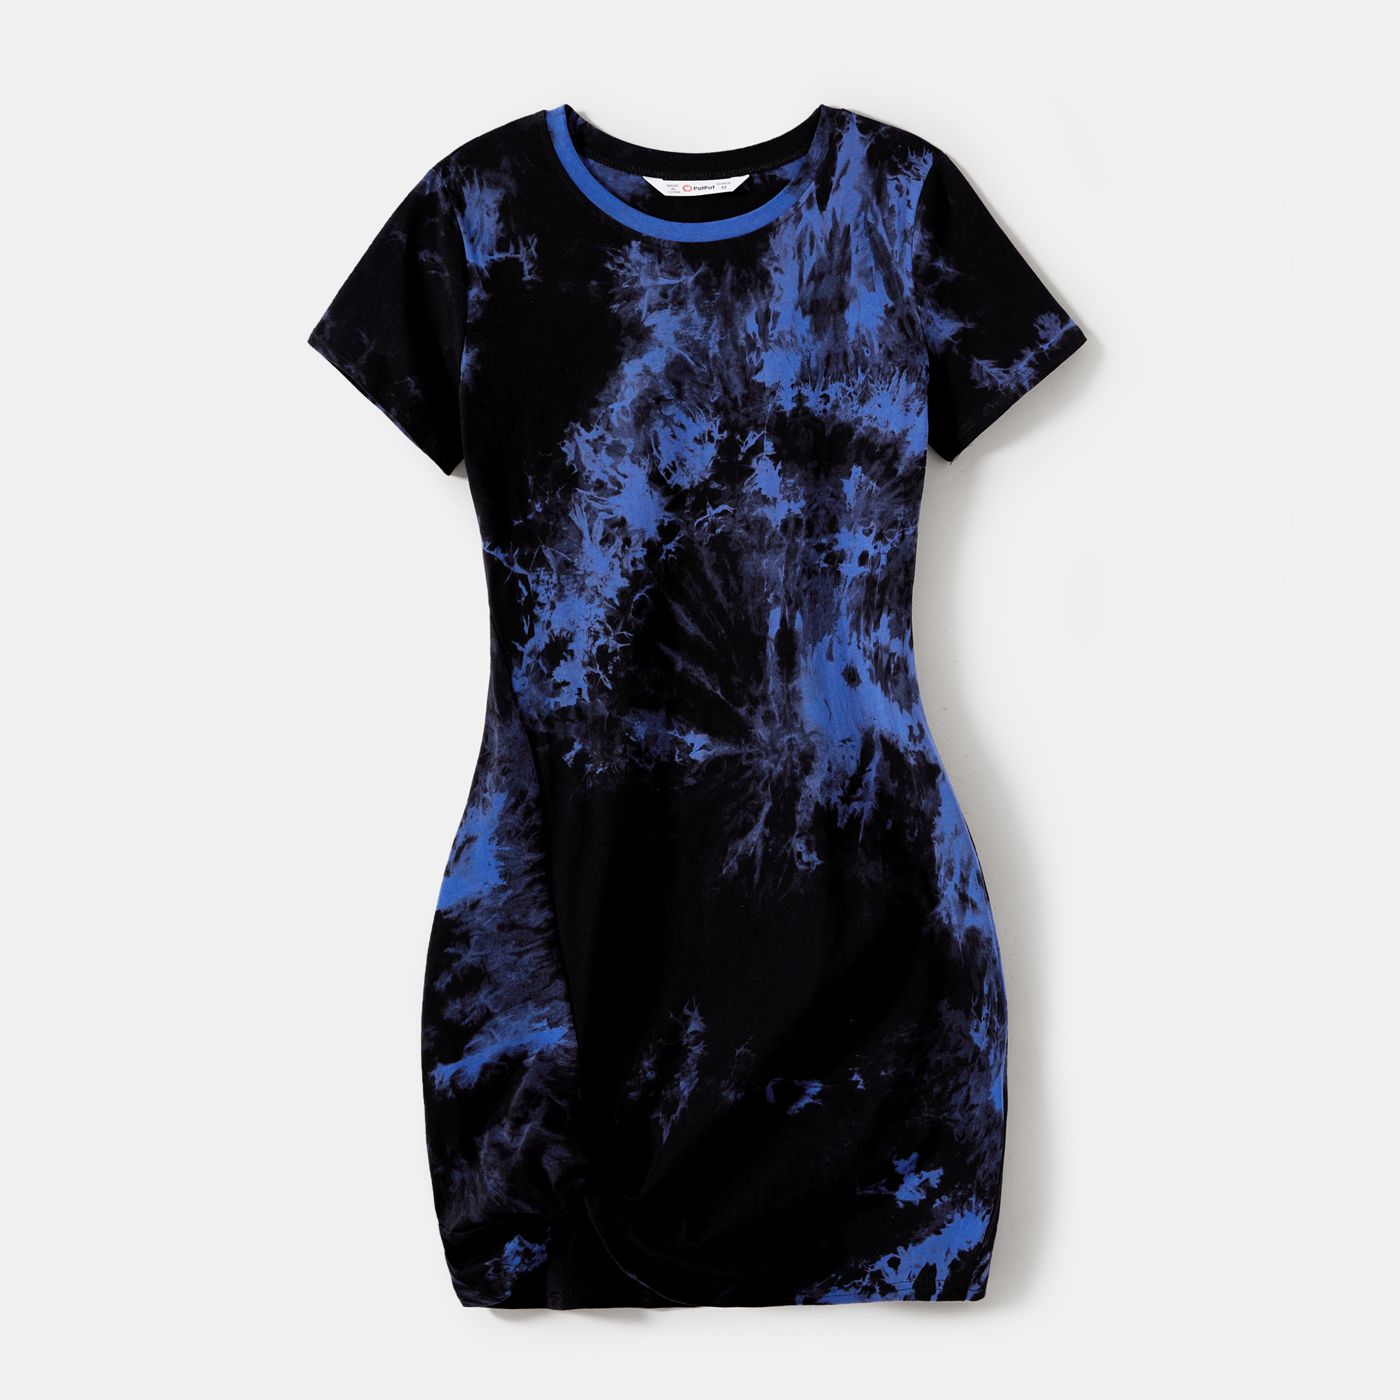 Family Matching 95% Cotton Short-sleeve Tie Dye Twist Knot Bodycon Dresses And T-shirts Sets